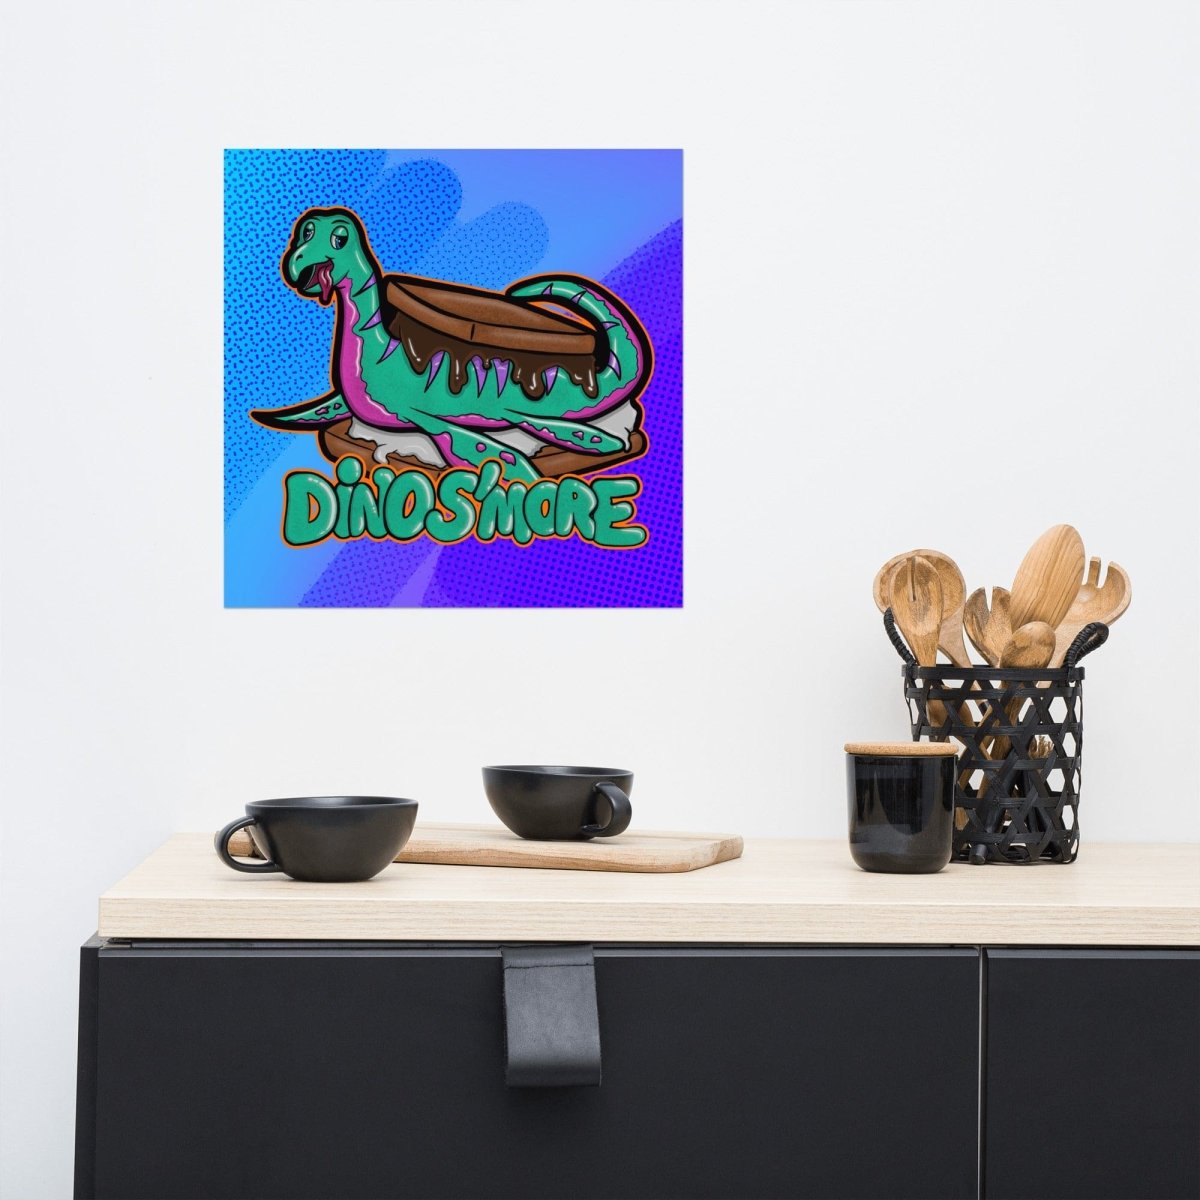 Dino S'more Poster - Maux Zachintosh